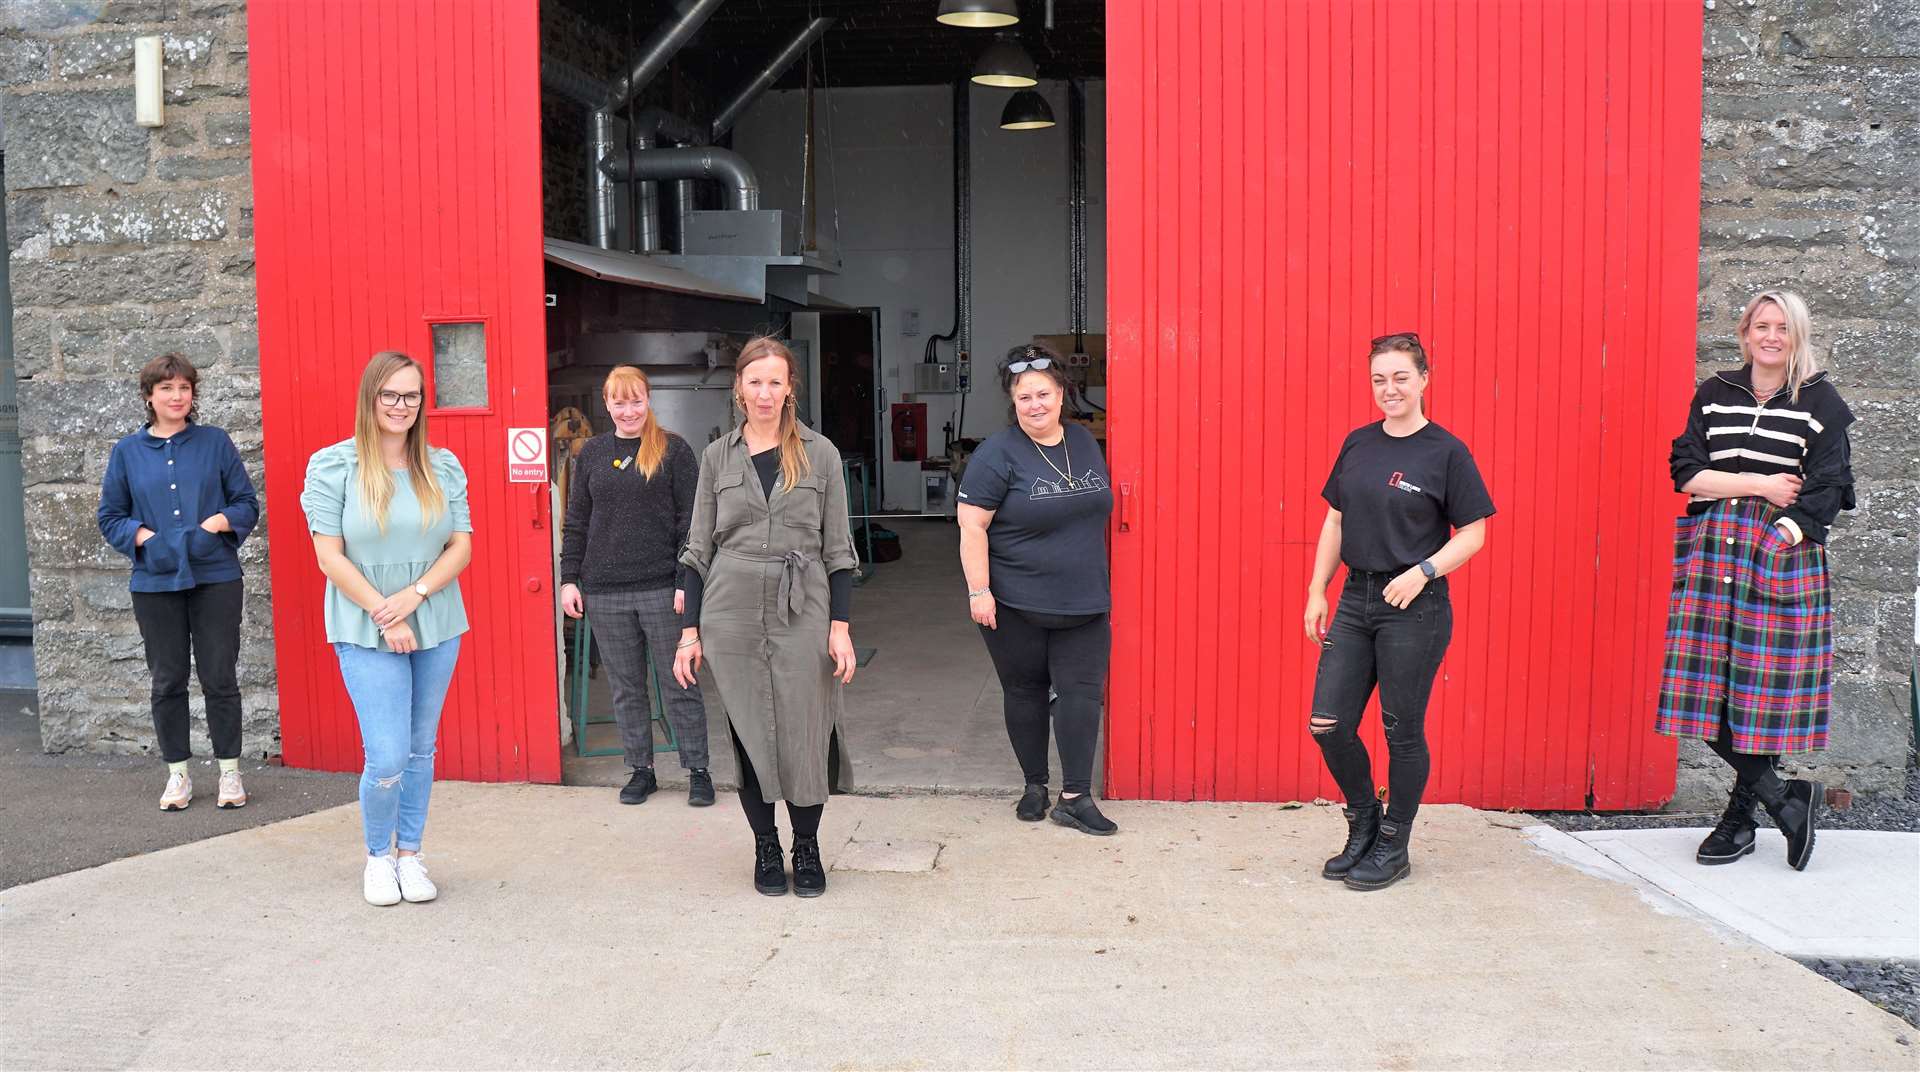 North Lands Creative staff celebrated the studio's 25th anniversary at an event in 2021. Then director Karen Phillips talked about a £300K funding boost after the pandemic that would help secure the future of the arts studio and 'help protect jobs'. Picture: DGS